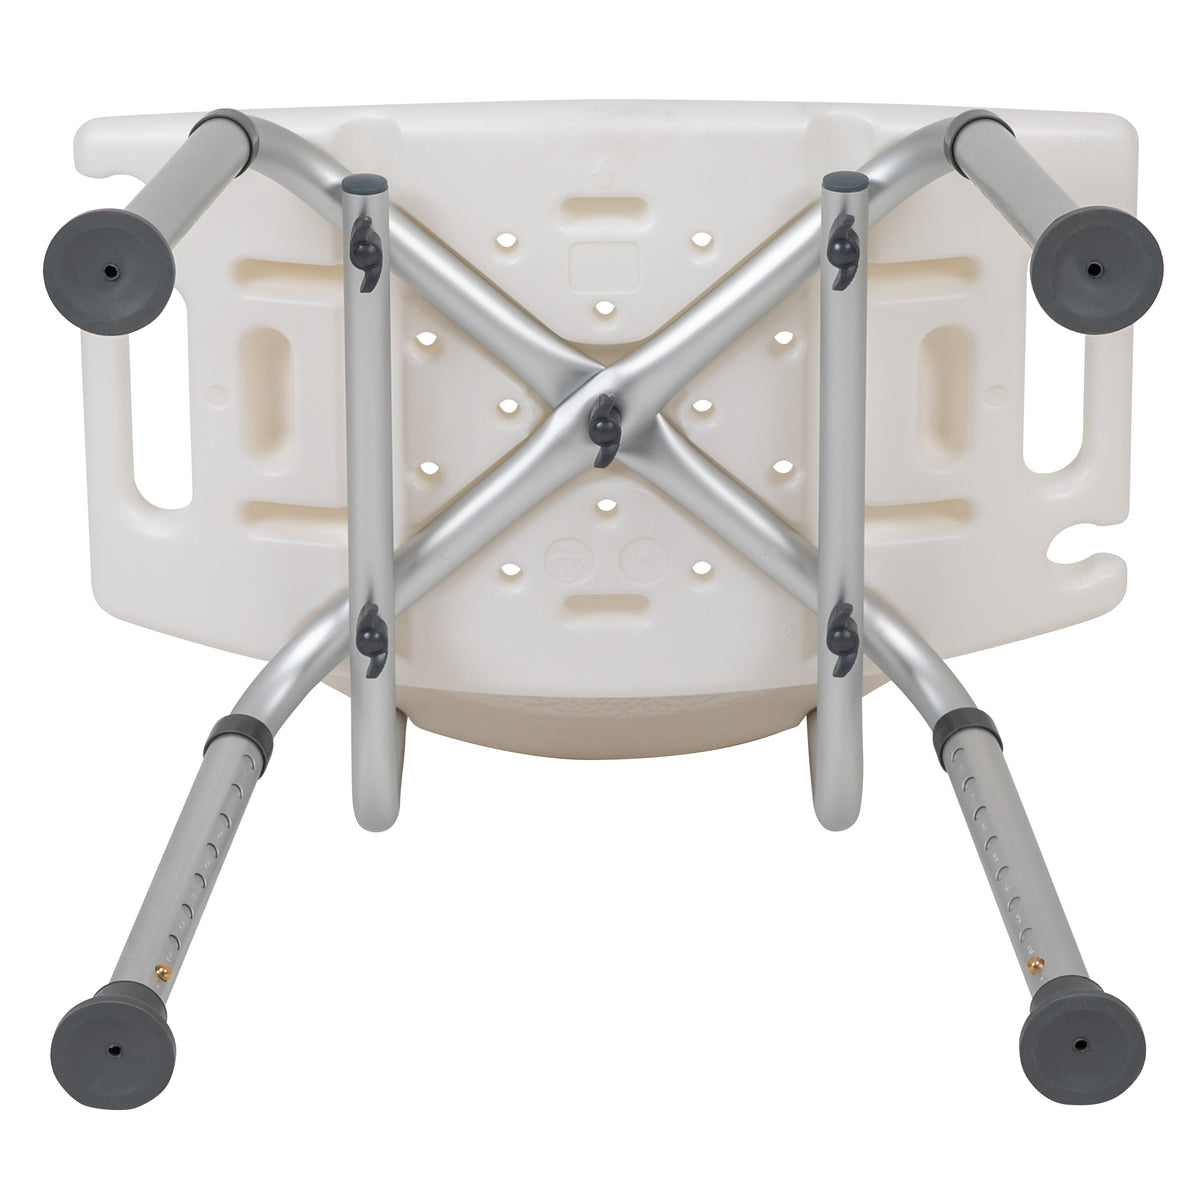 White |#| Tool-Free 300 Lb. Capacity, Adjustable White Bath & Shower Chair with Back